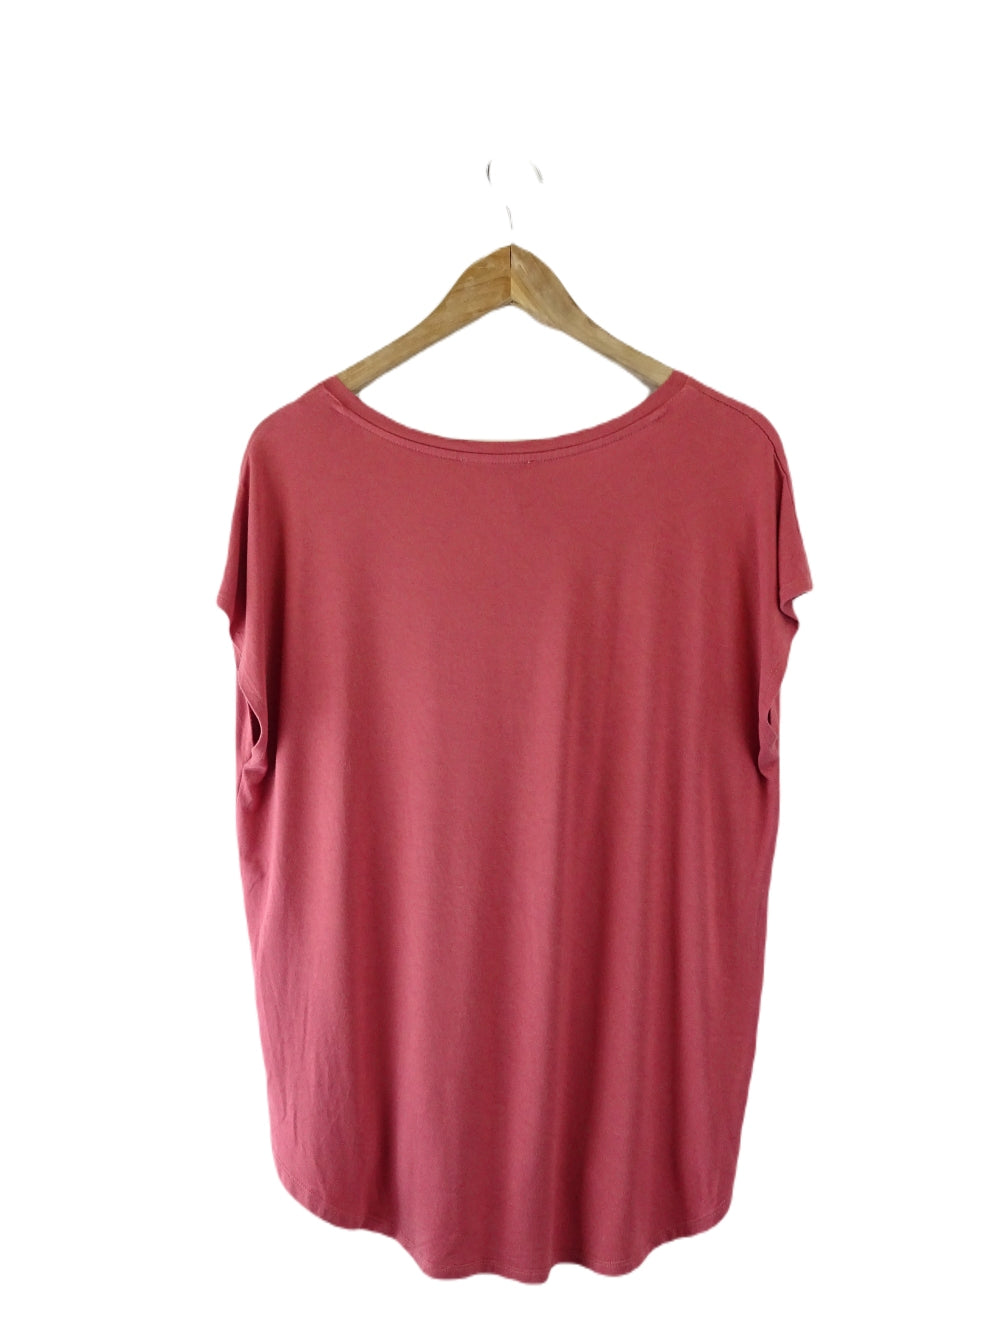 Just Jeans Pink T-shirt M